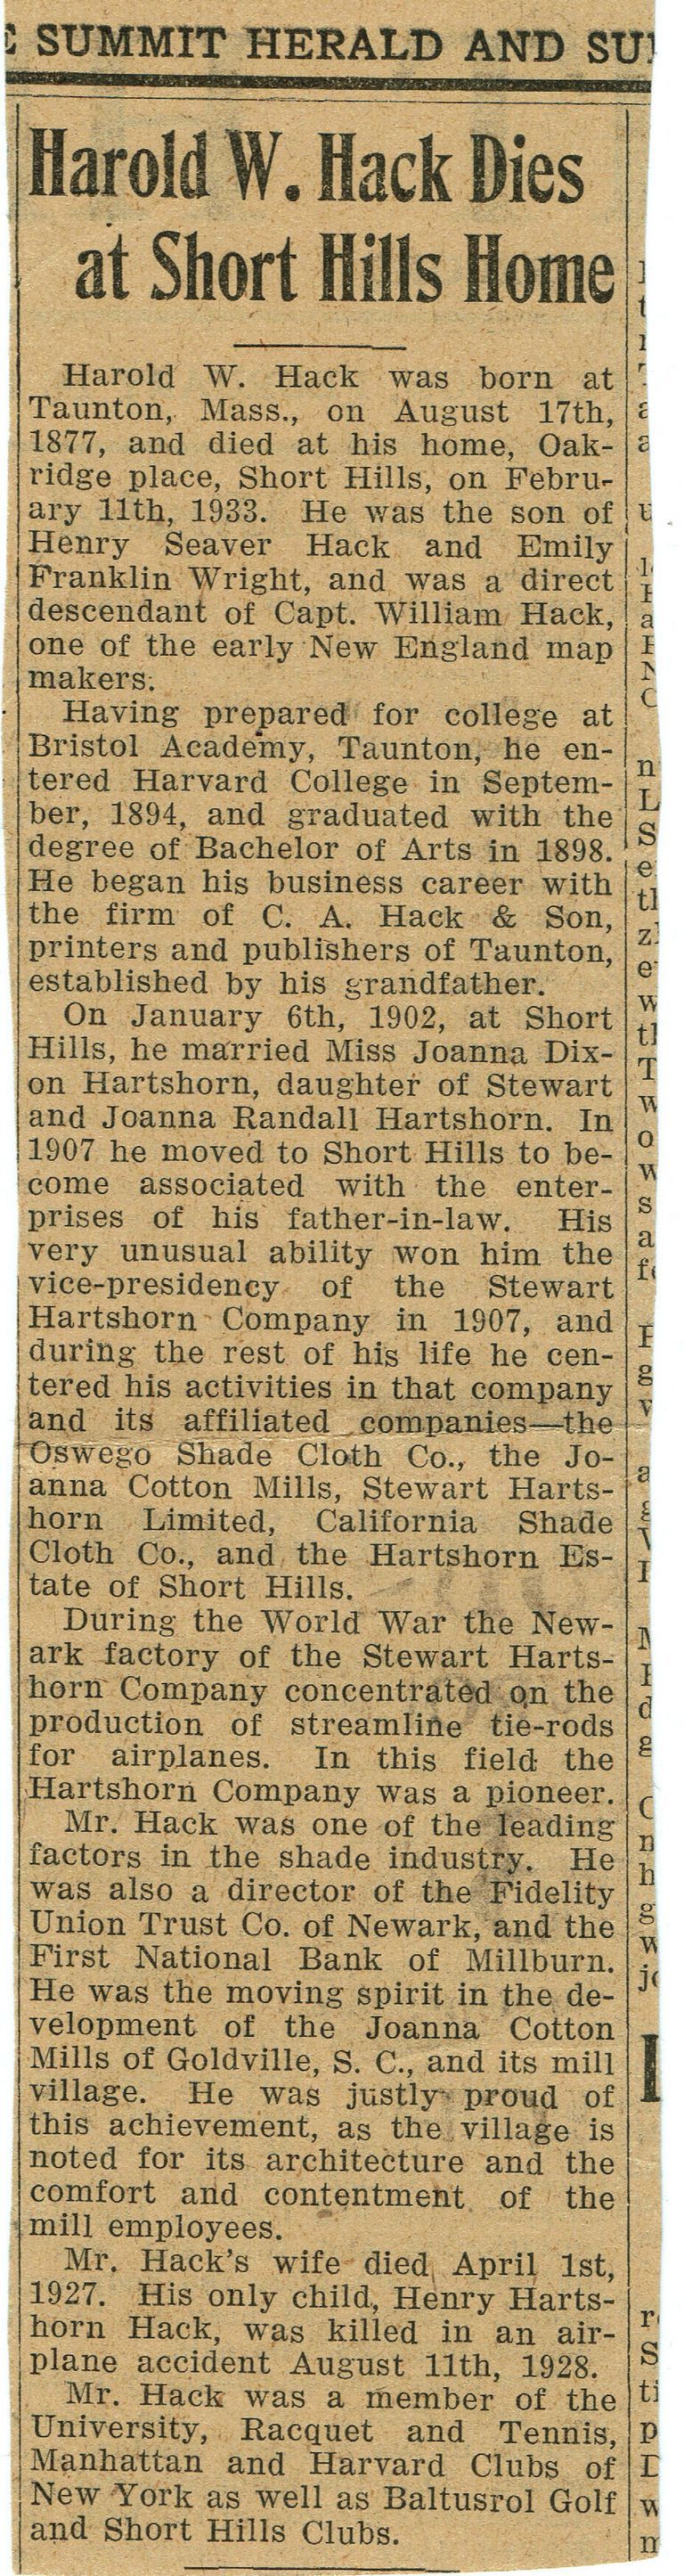          Harold Hack Obituary, Summit Herald, February 14, 1933 picture number 1
   